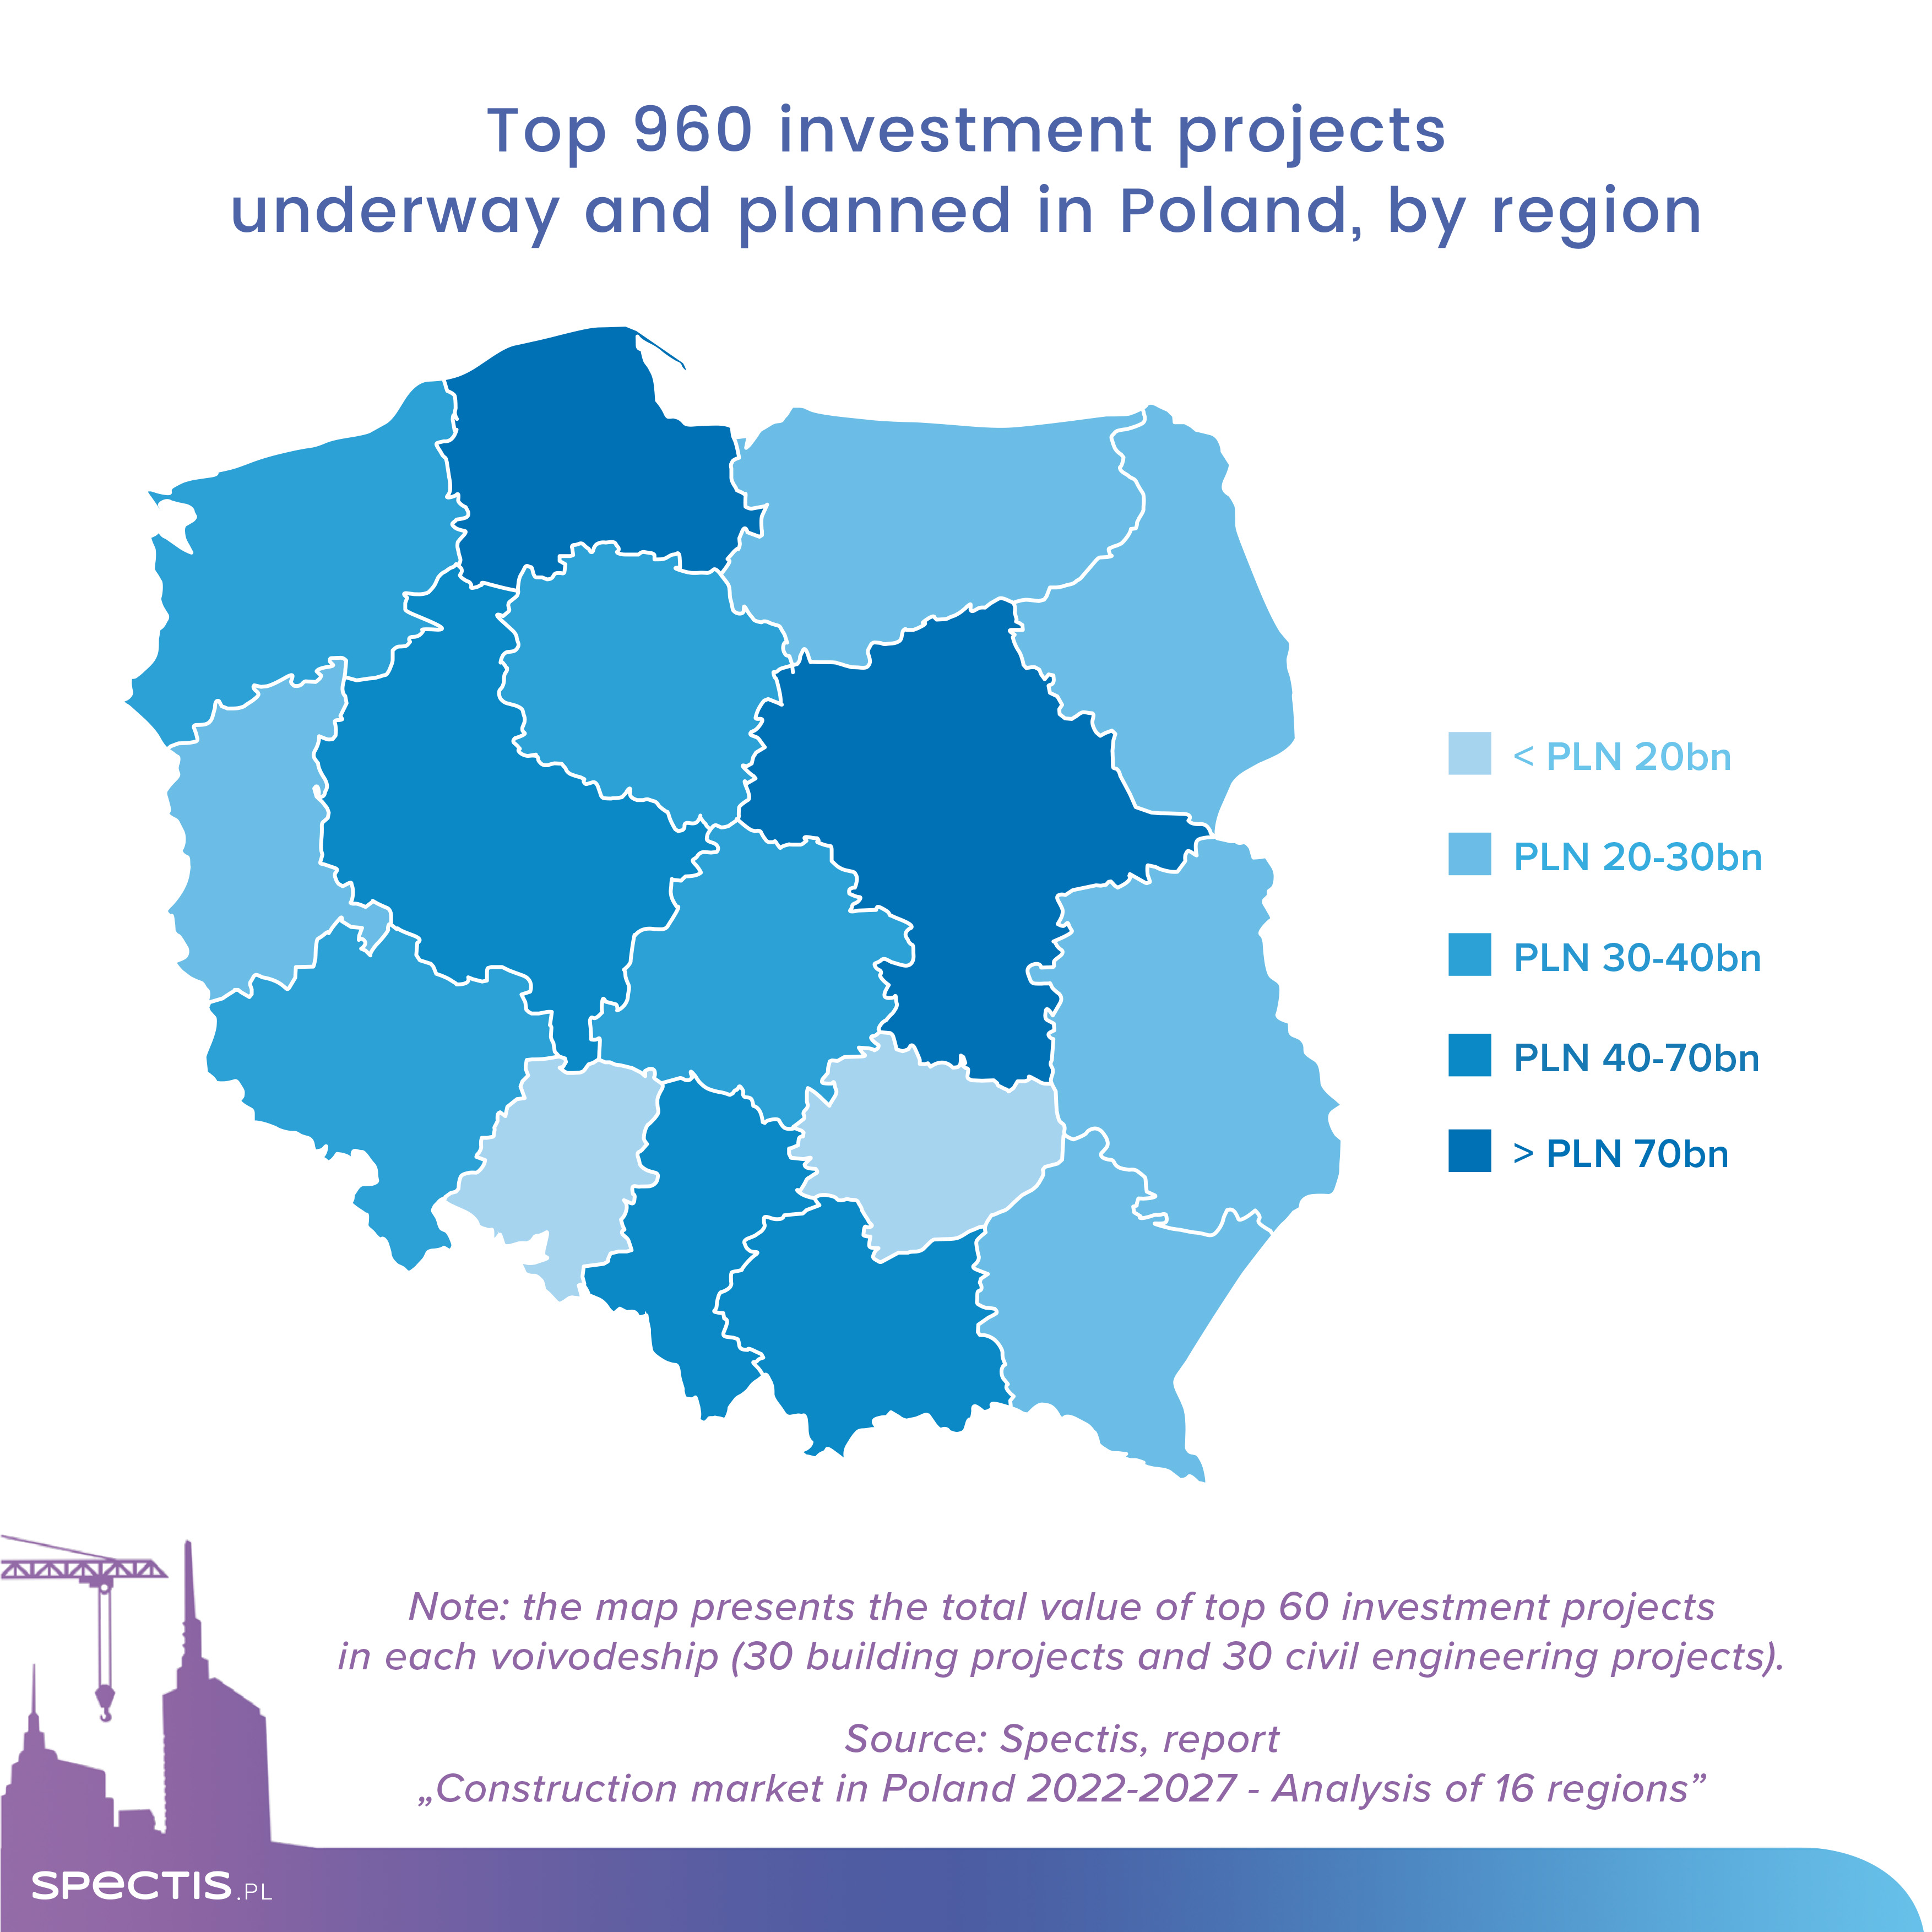 PLN 800bn for nearly thousand large-scale projects in Poland